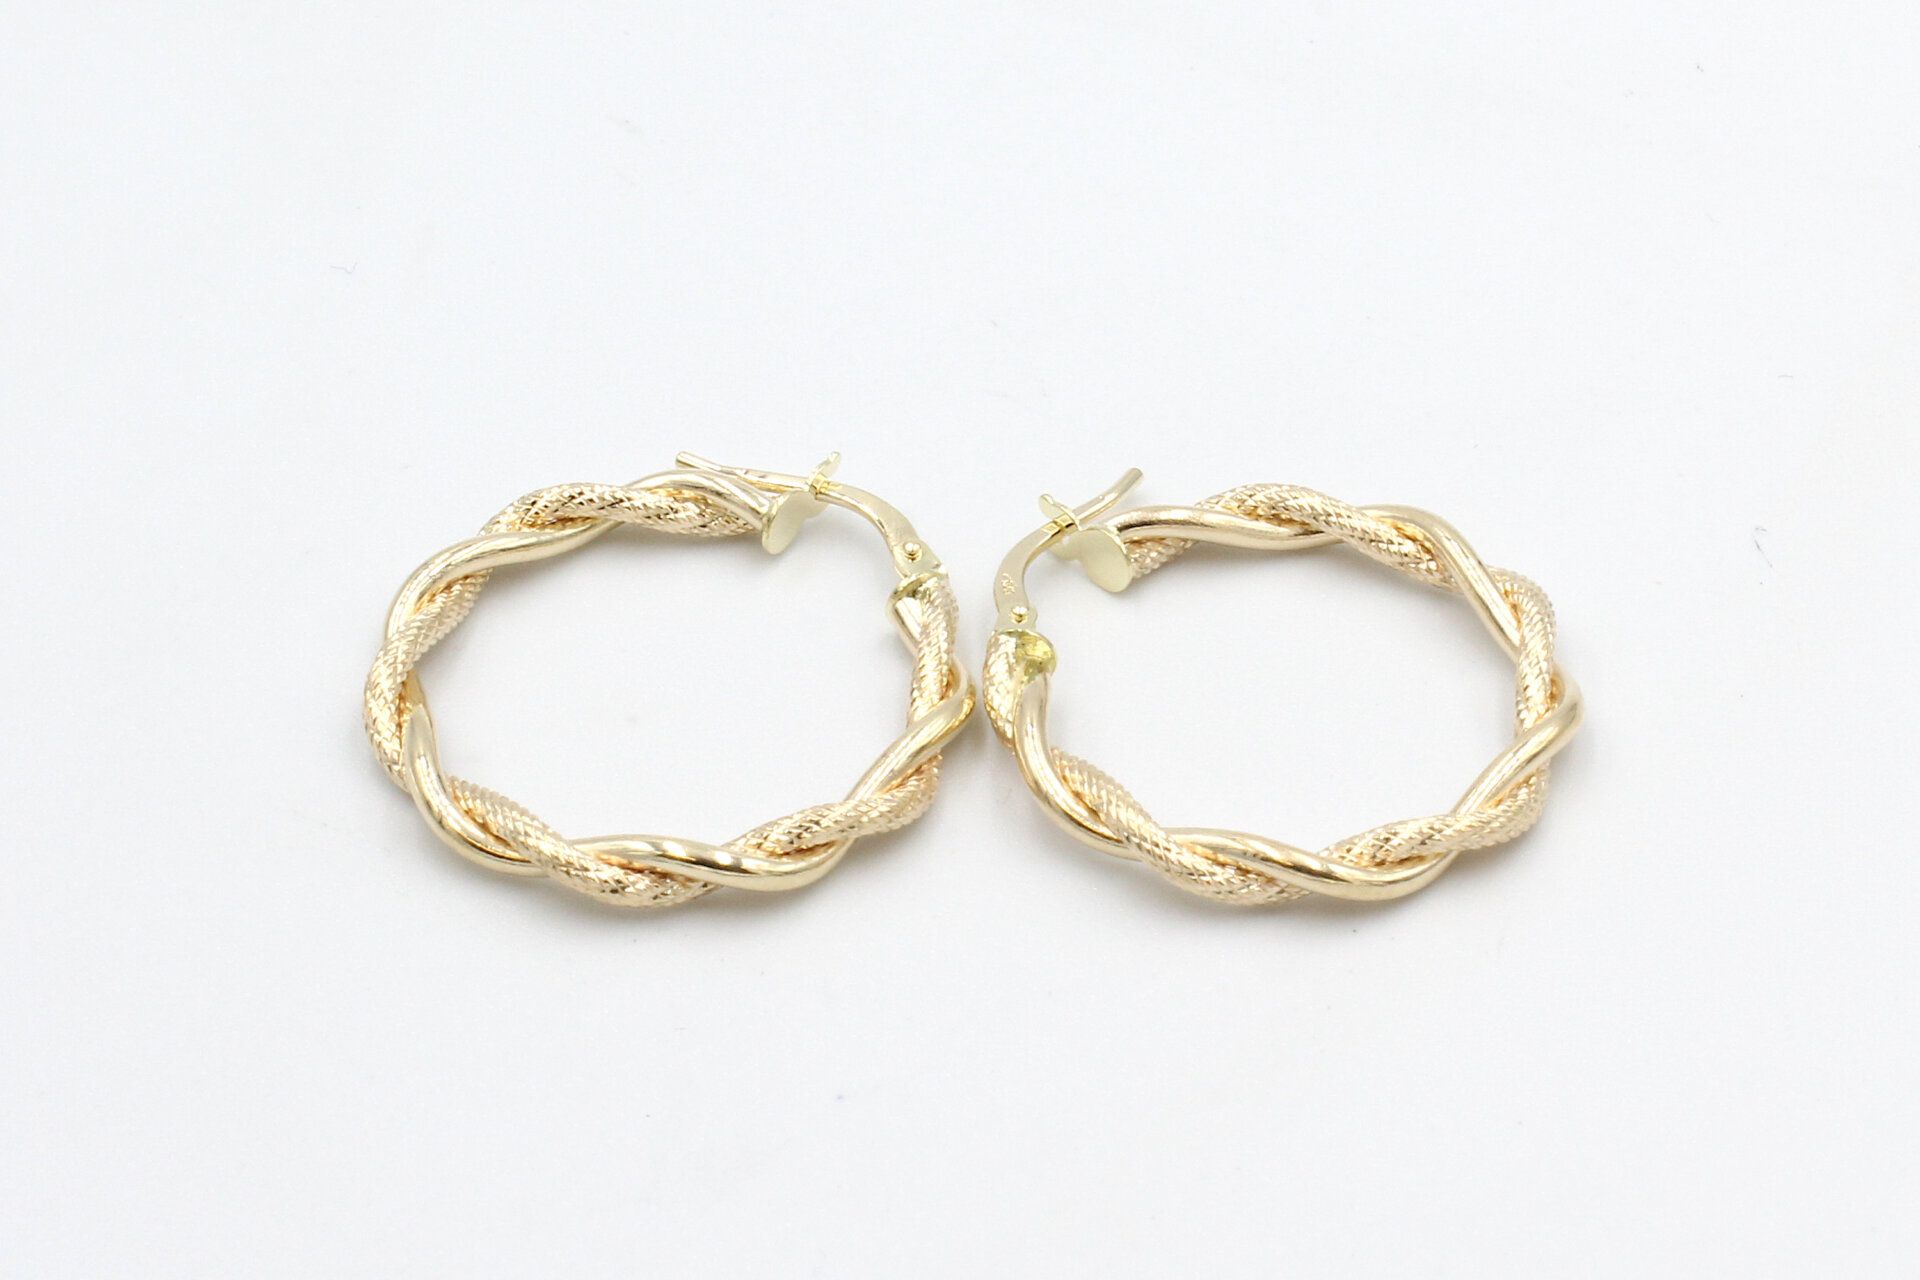 gold twisted hoop earrings on a white background